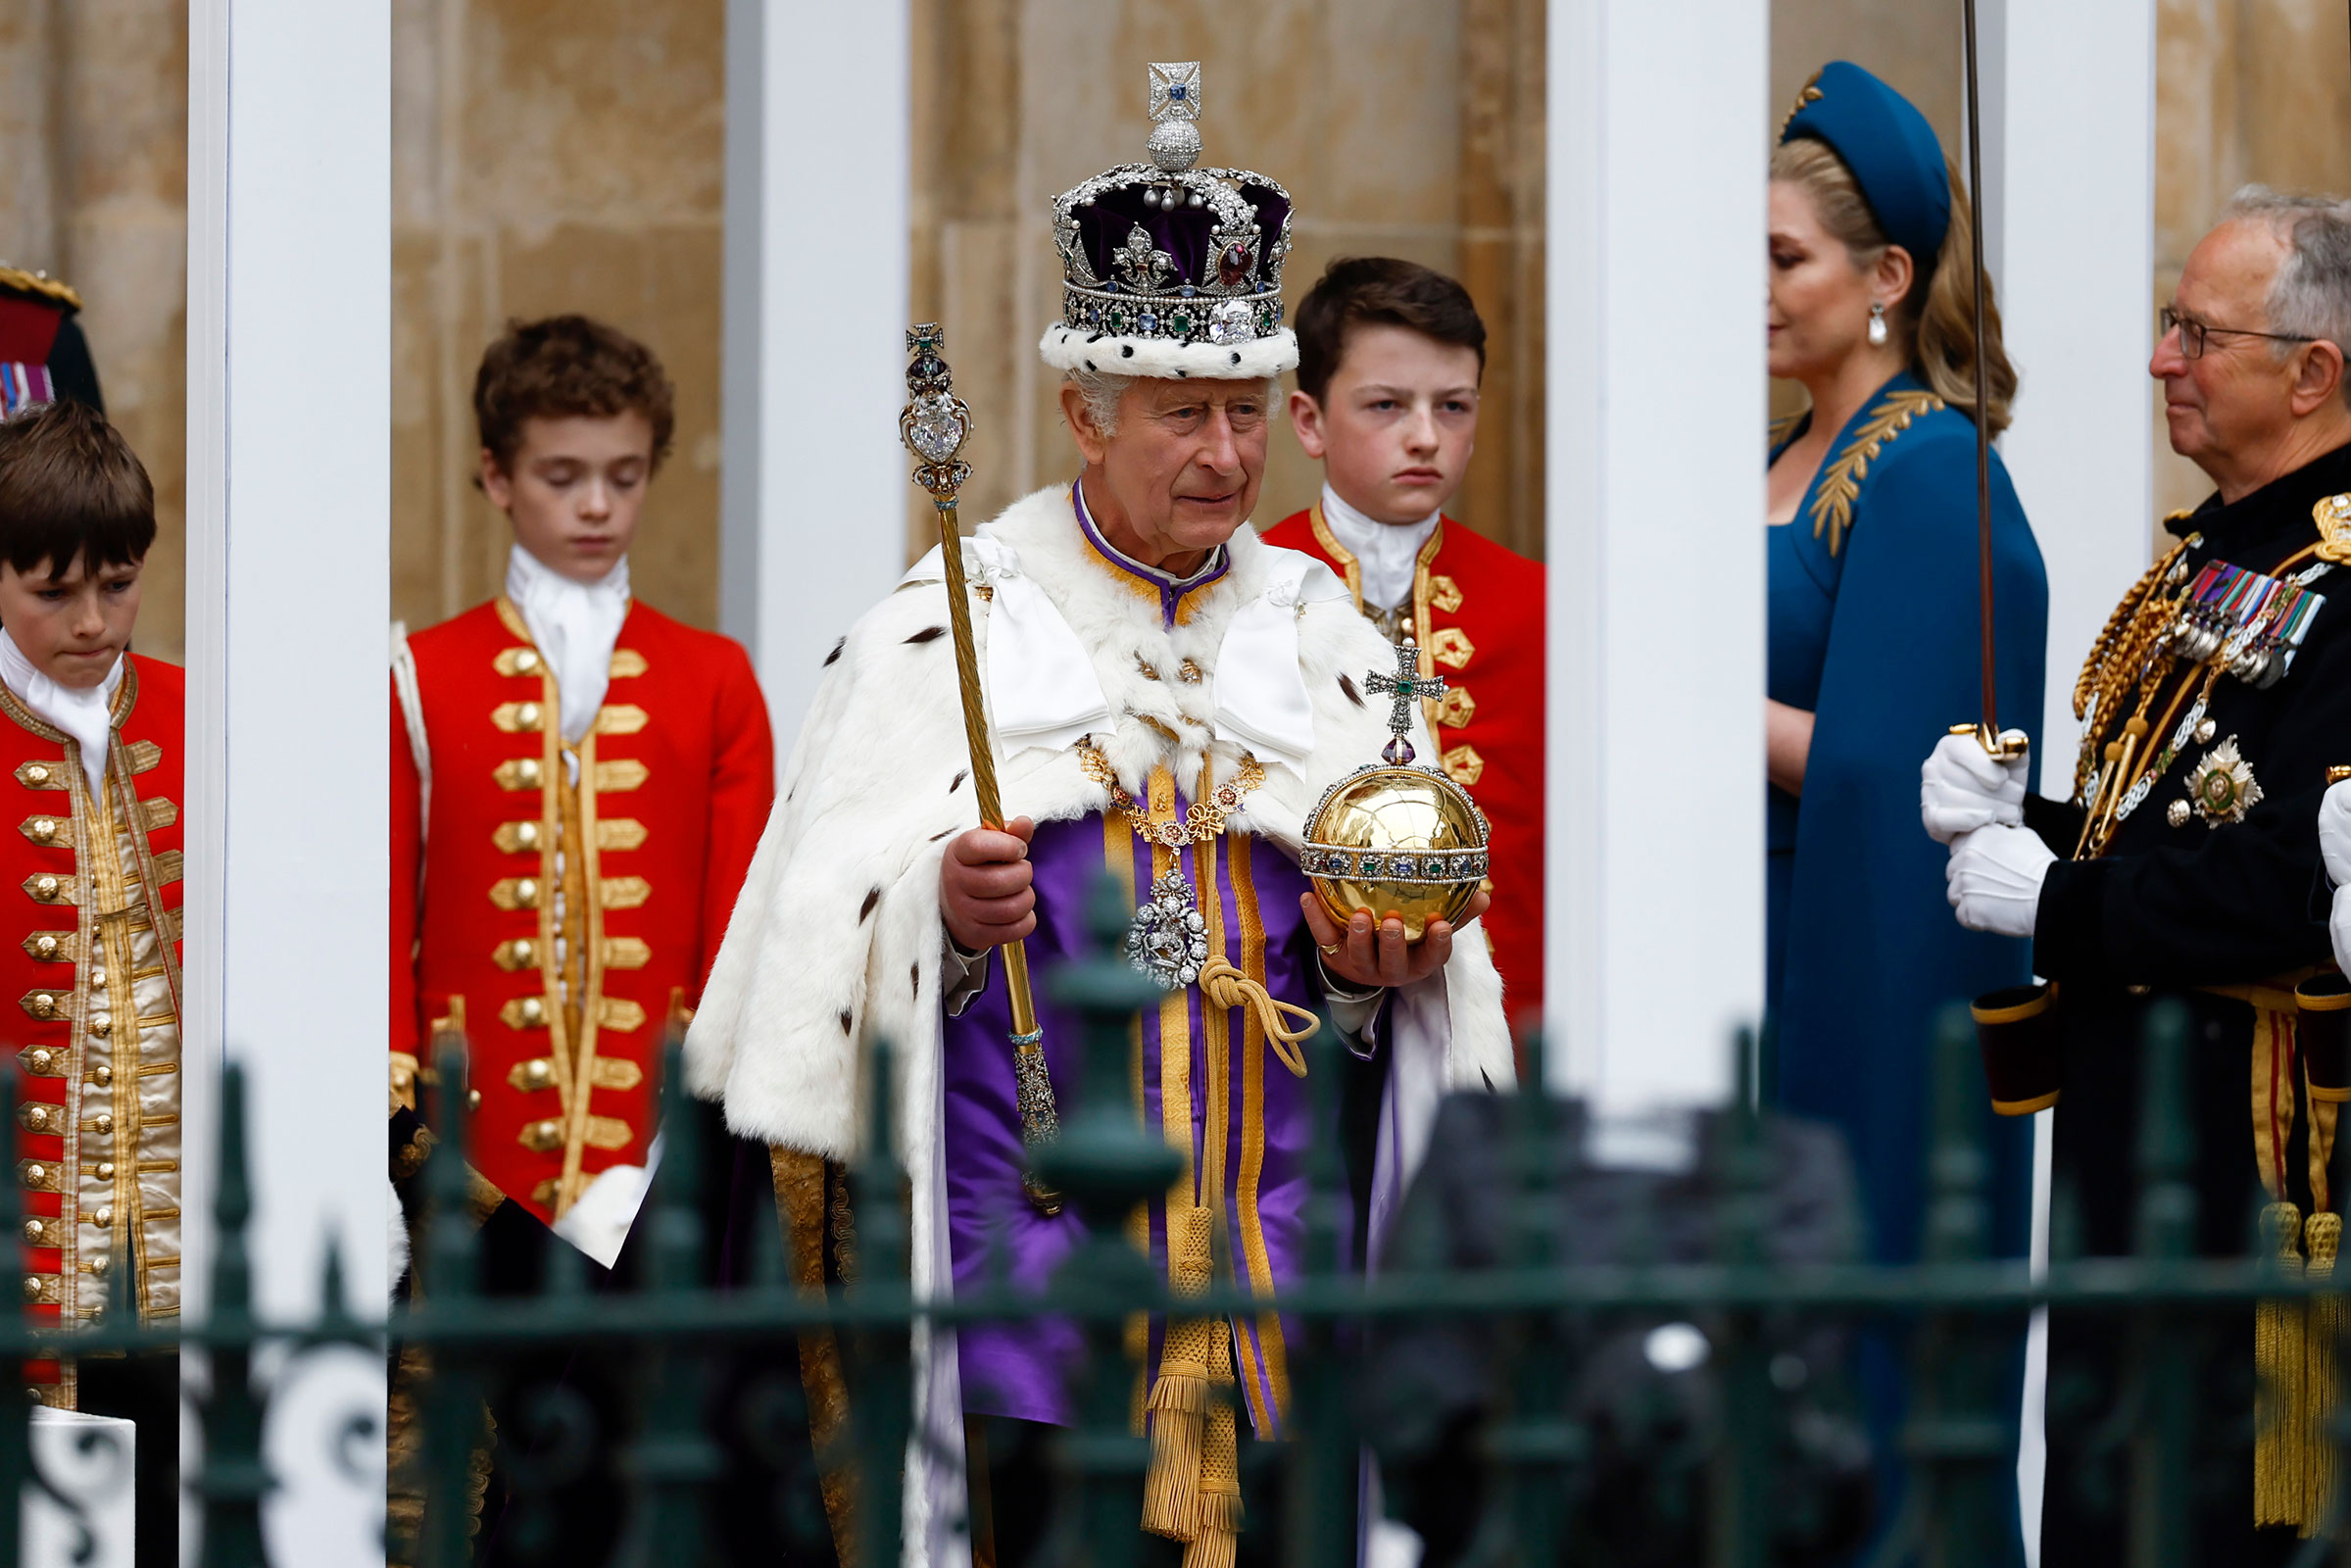  King Charles III departs the Coronation service at Westminster Abbey.